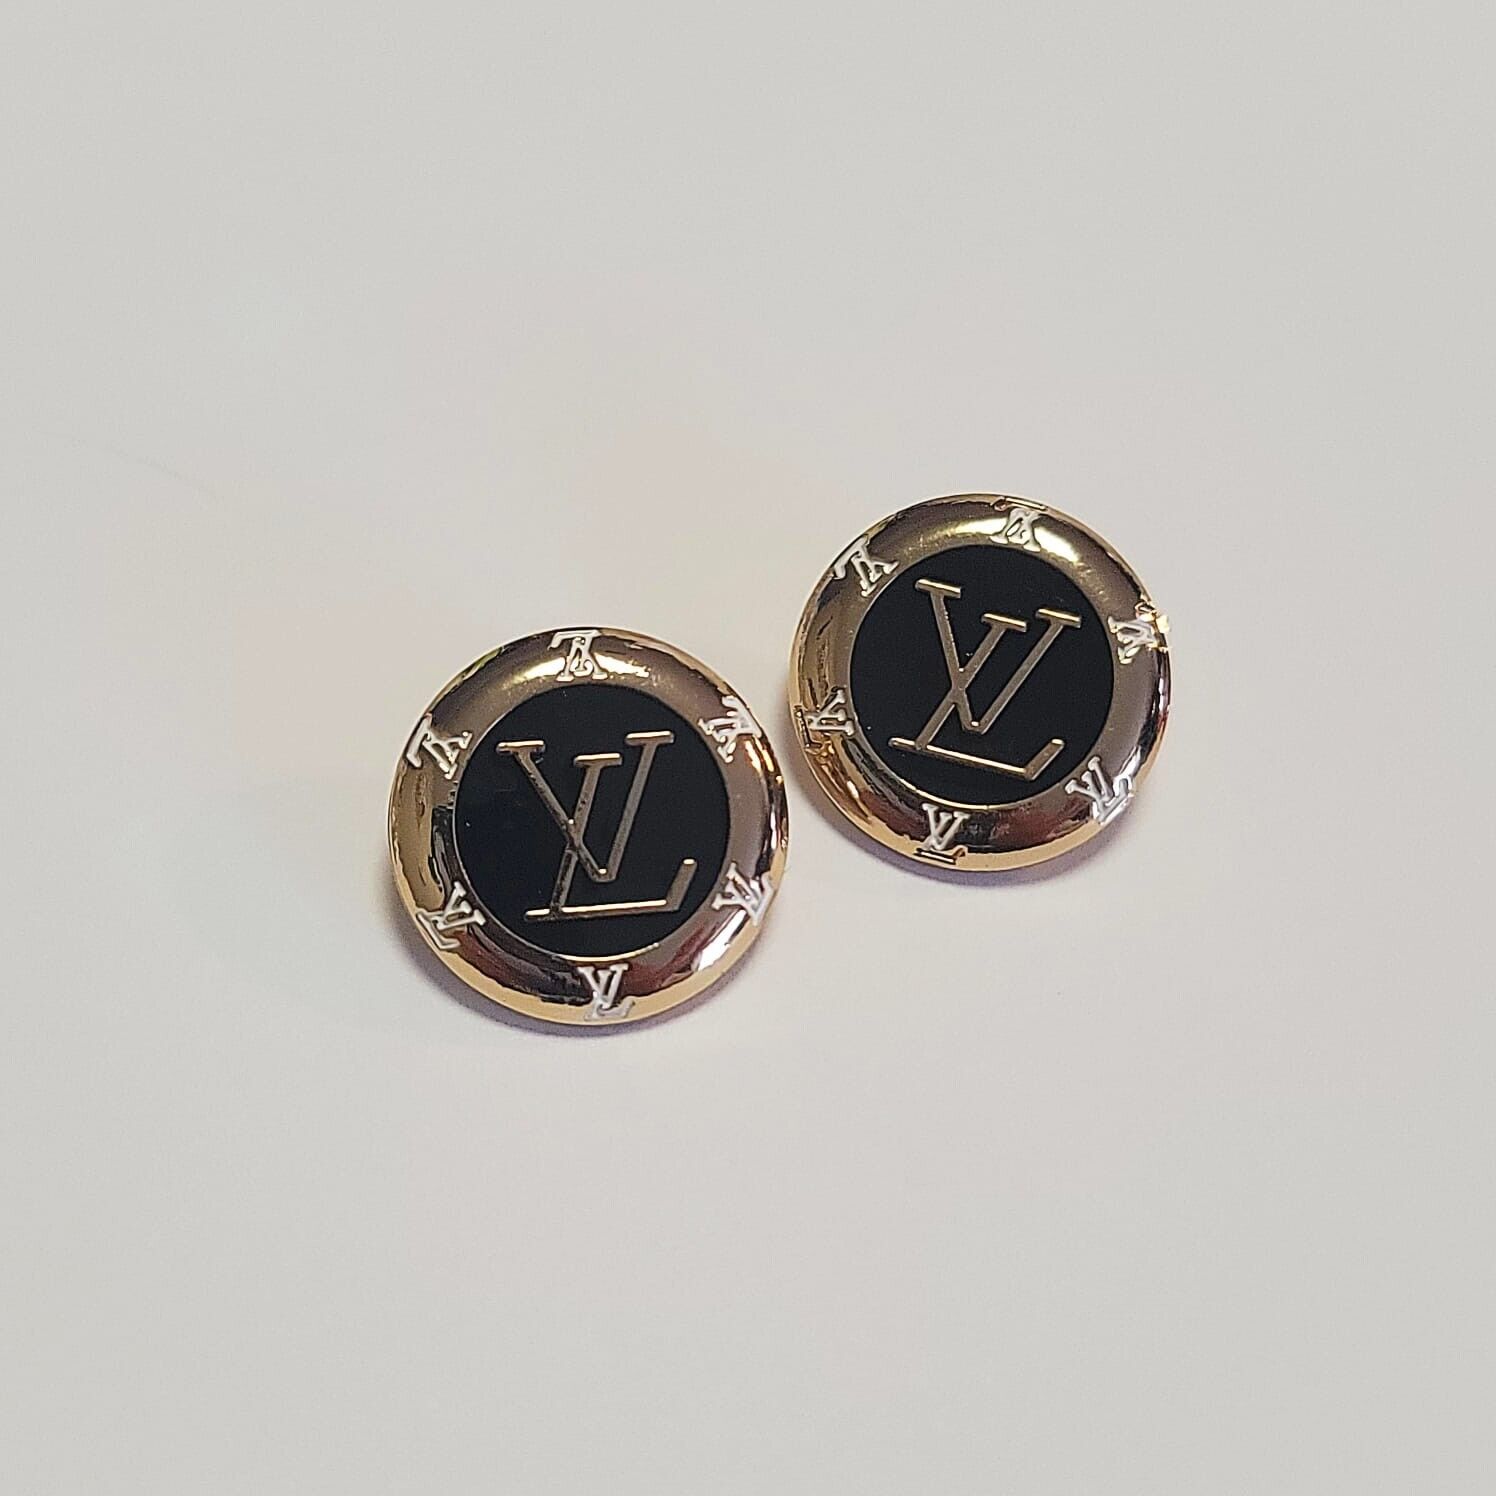 2pc Set 20mm Stamped Louis Vuitton Buttons